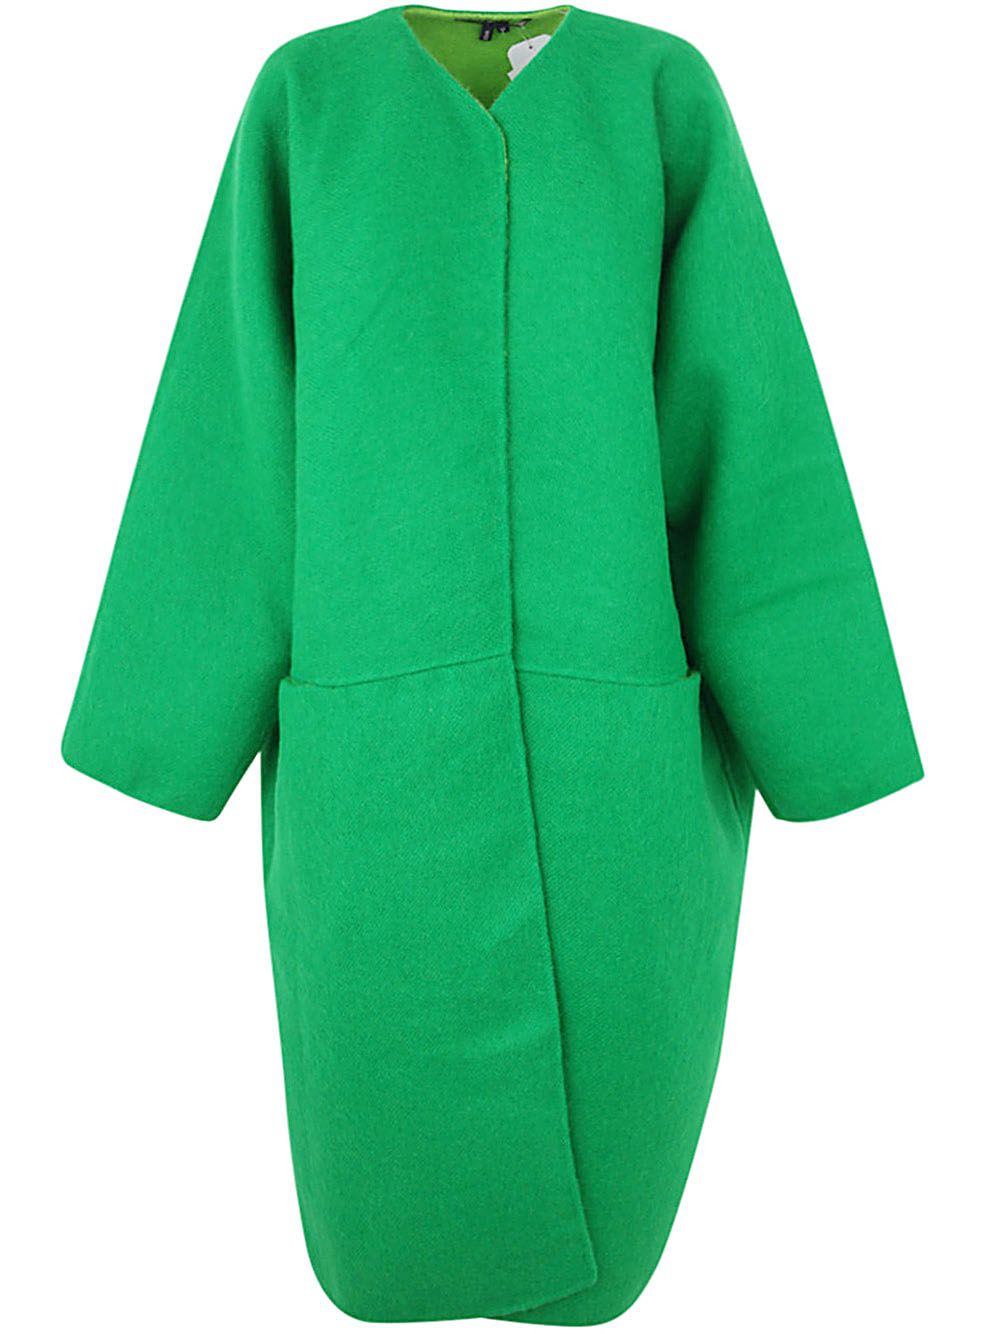 SOFIE D'HOORE DOUBLE FACE COAT WITH SLIT FRONT POCKETS